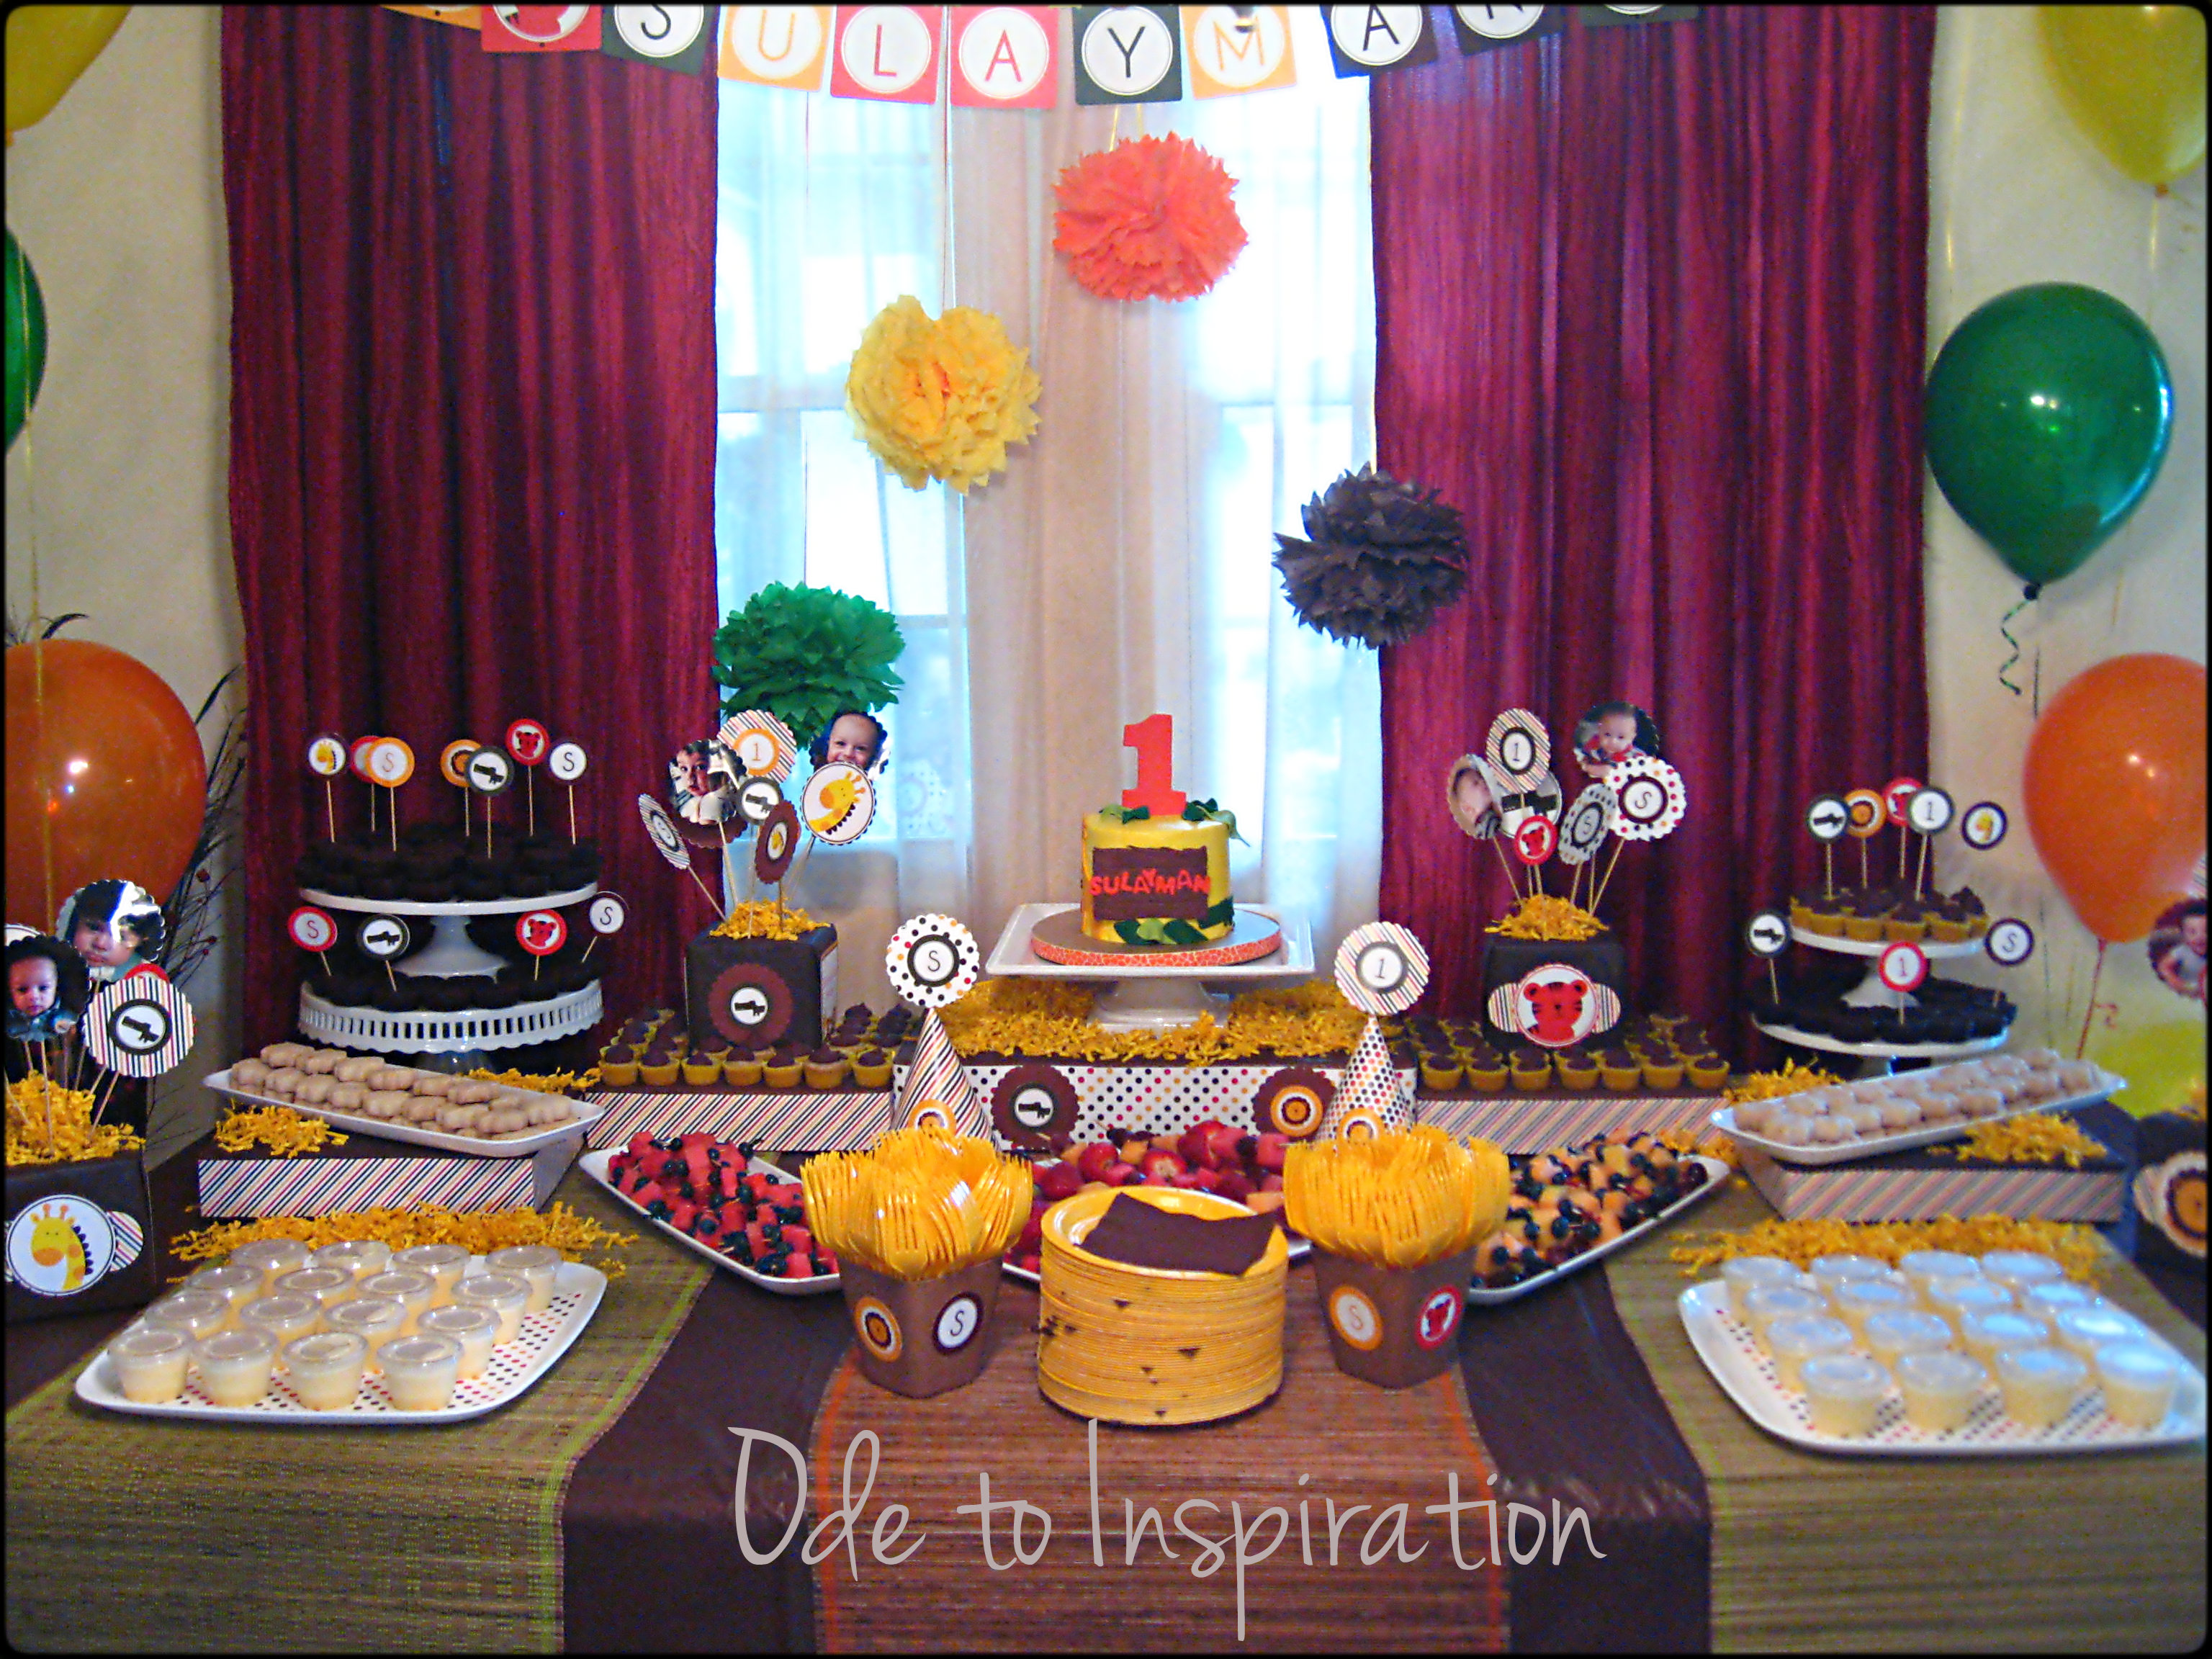 birthday party ideas,birthday party places,birthday party themes for teens,